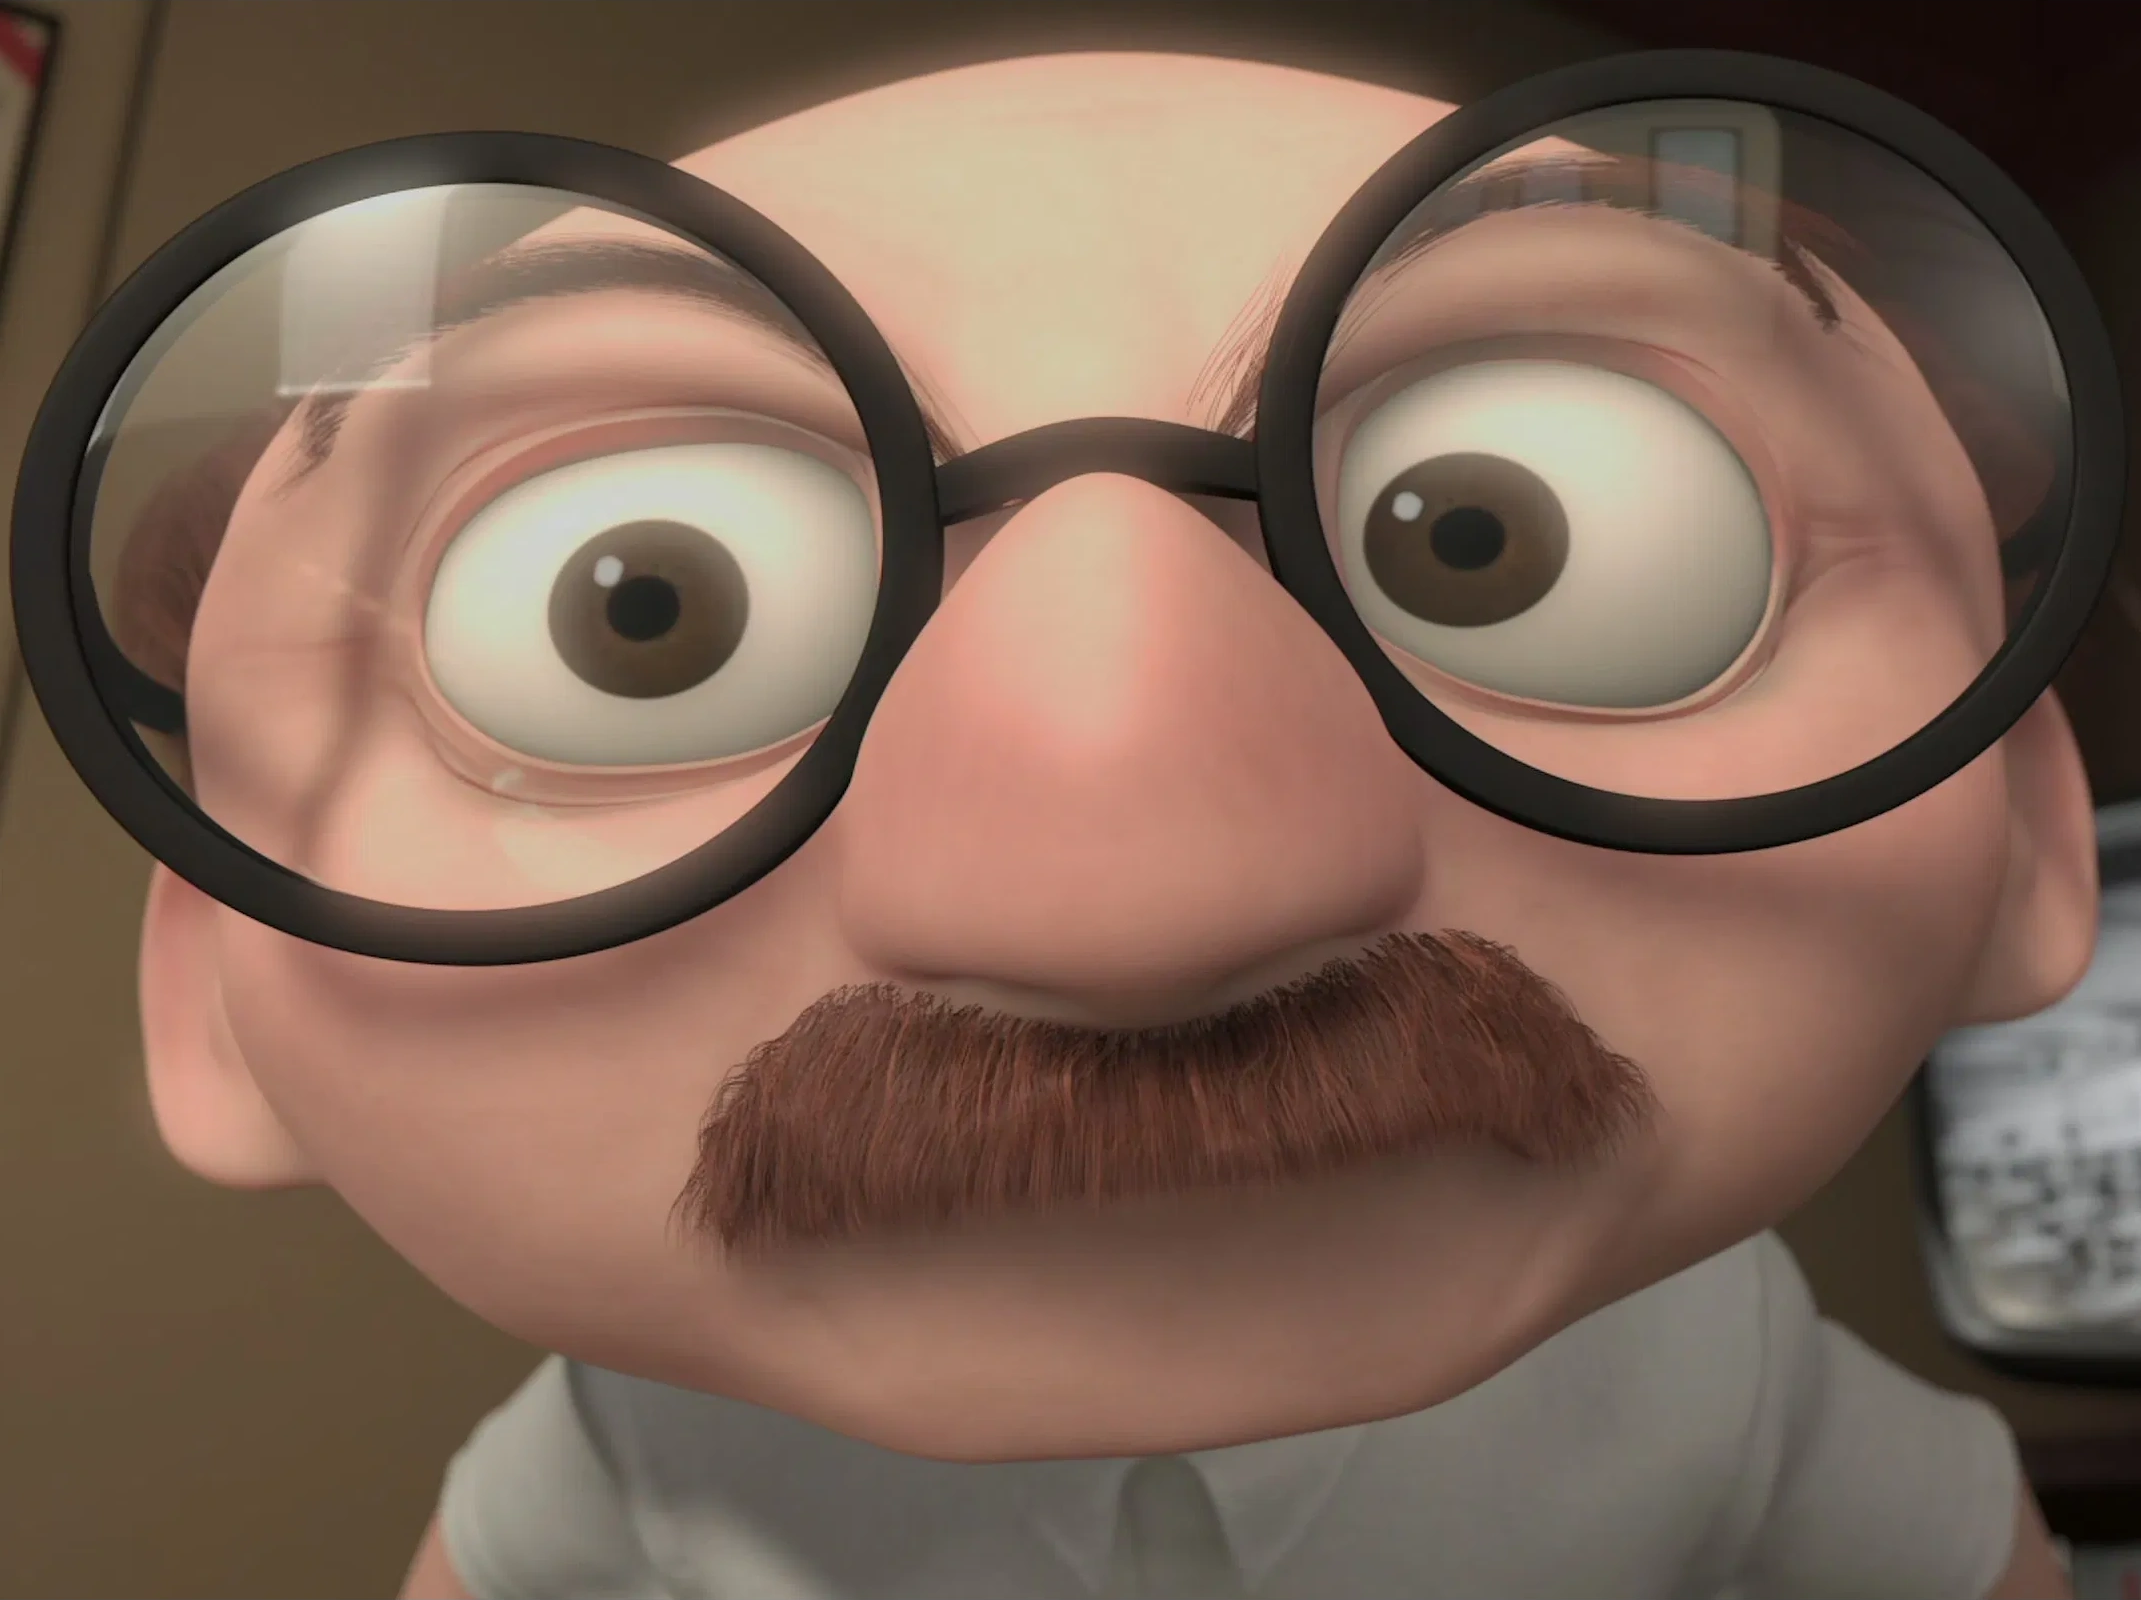 Does anyone have me meme/image from incredibles 2 where Mr